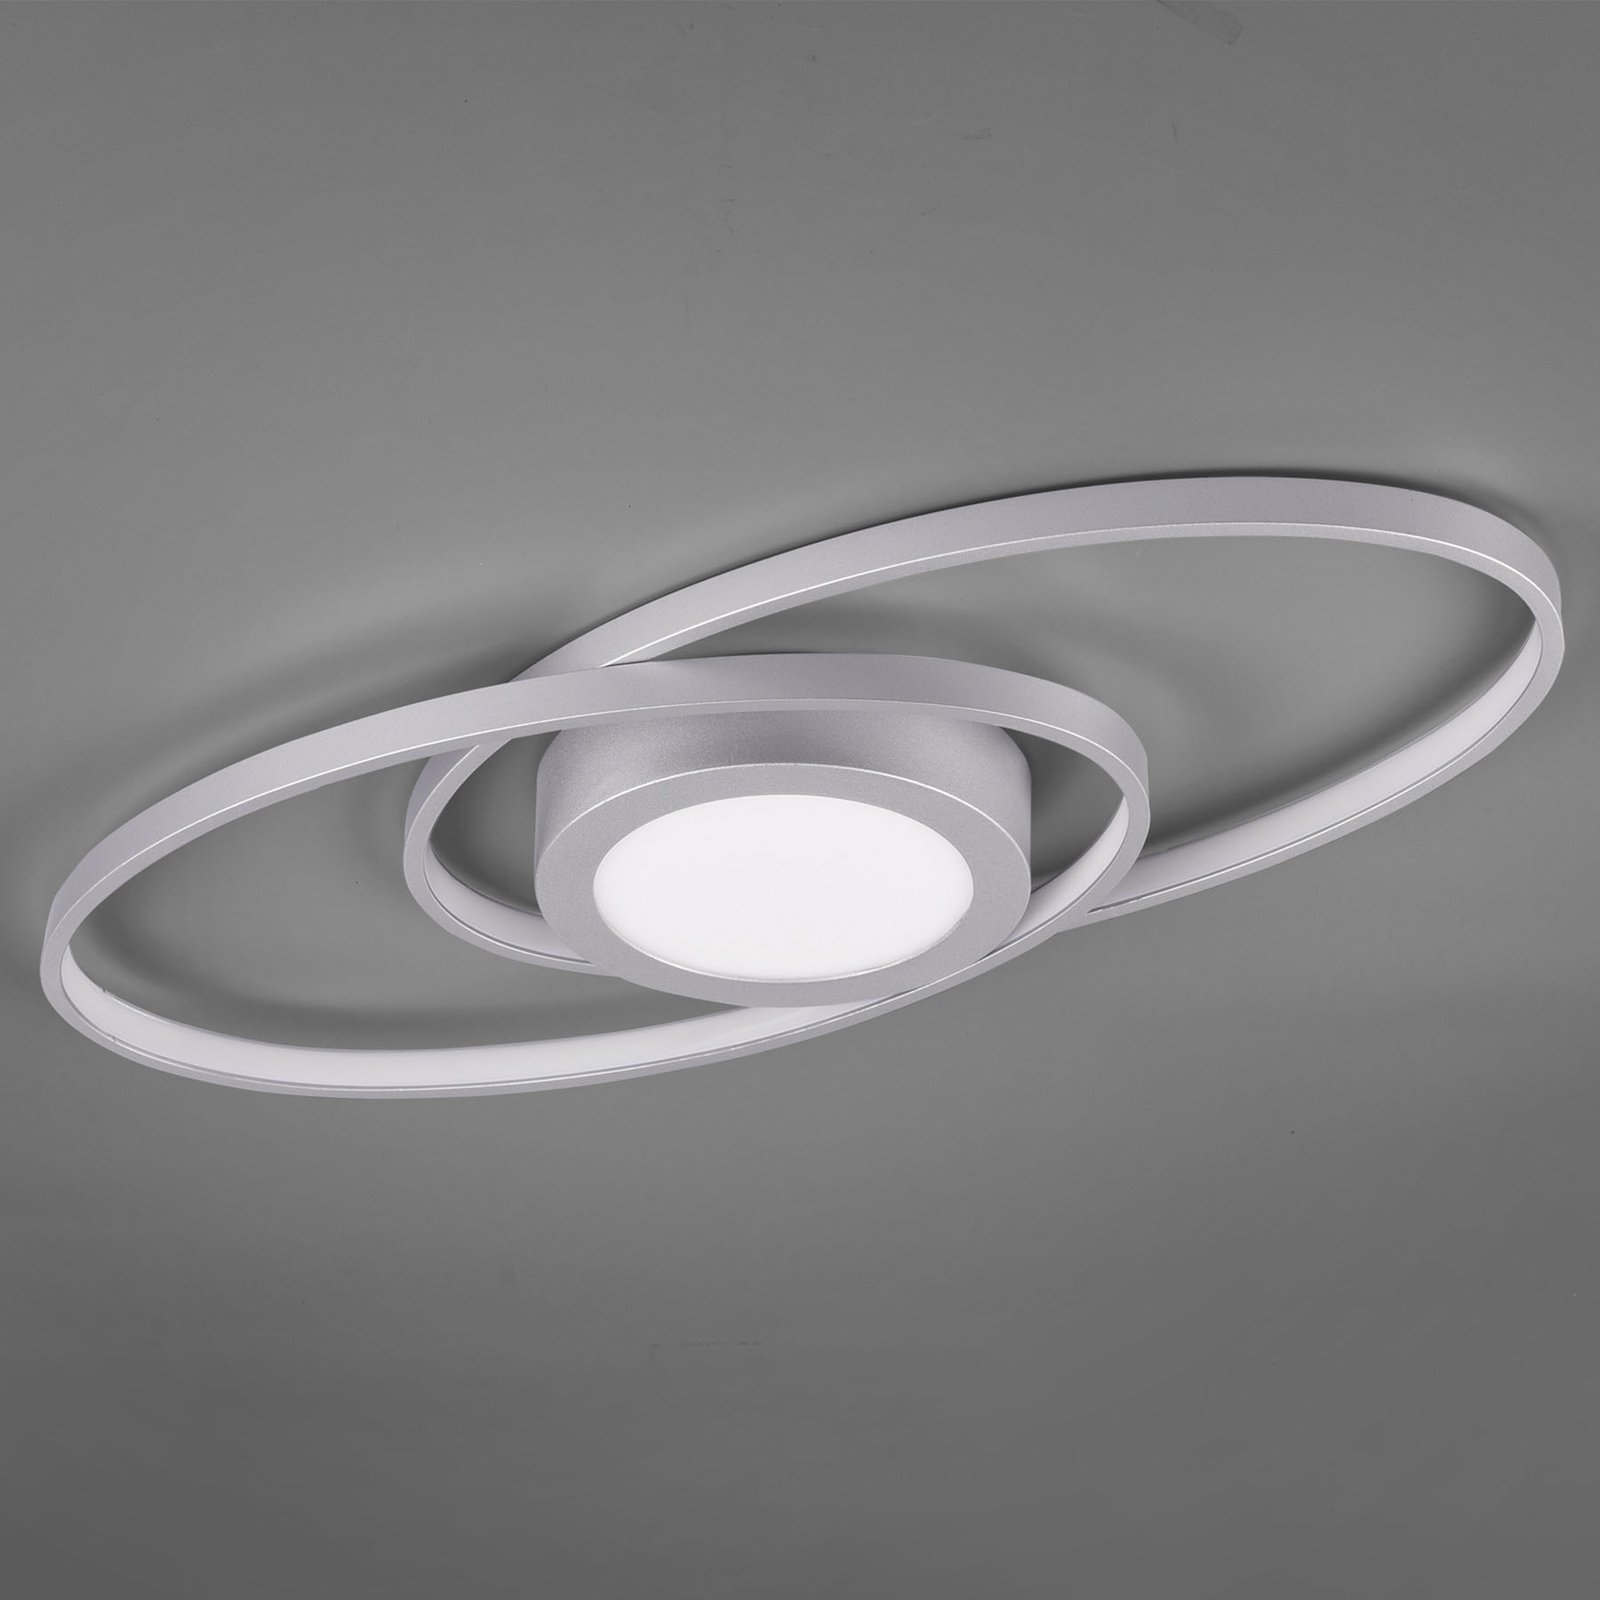 Galaxy LED ceiling light, dimmable, titanium